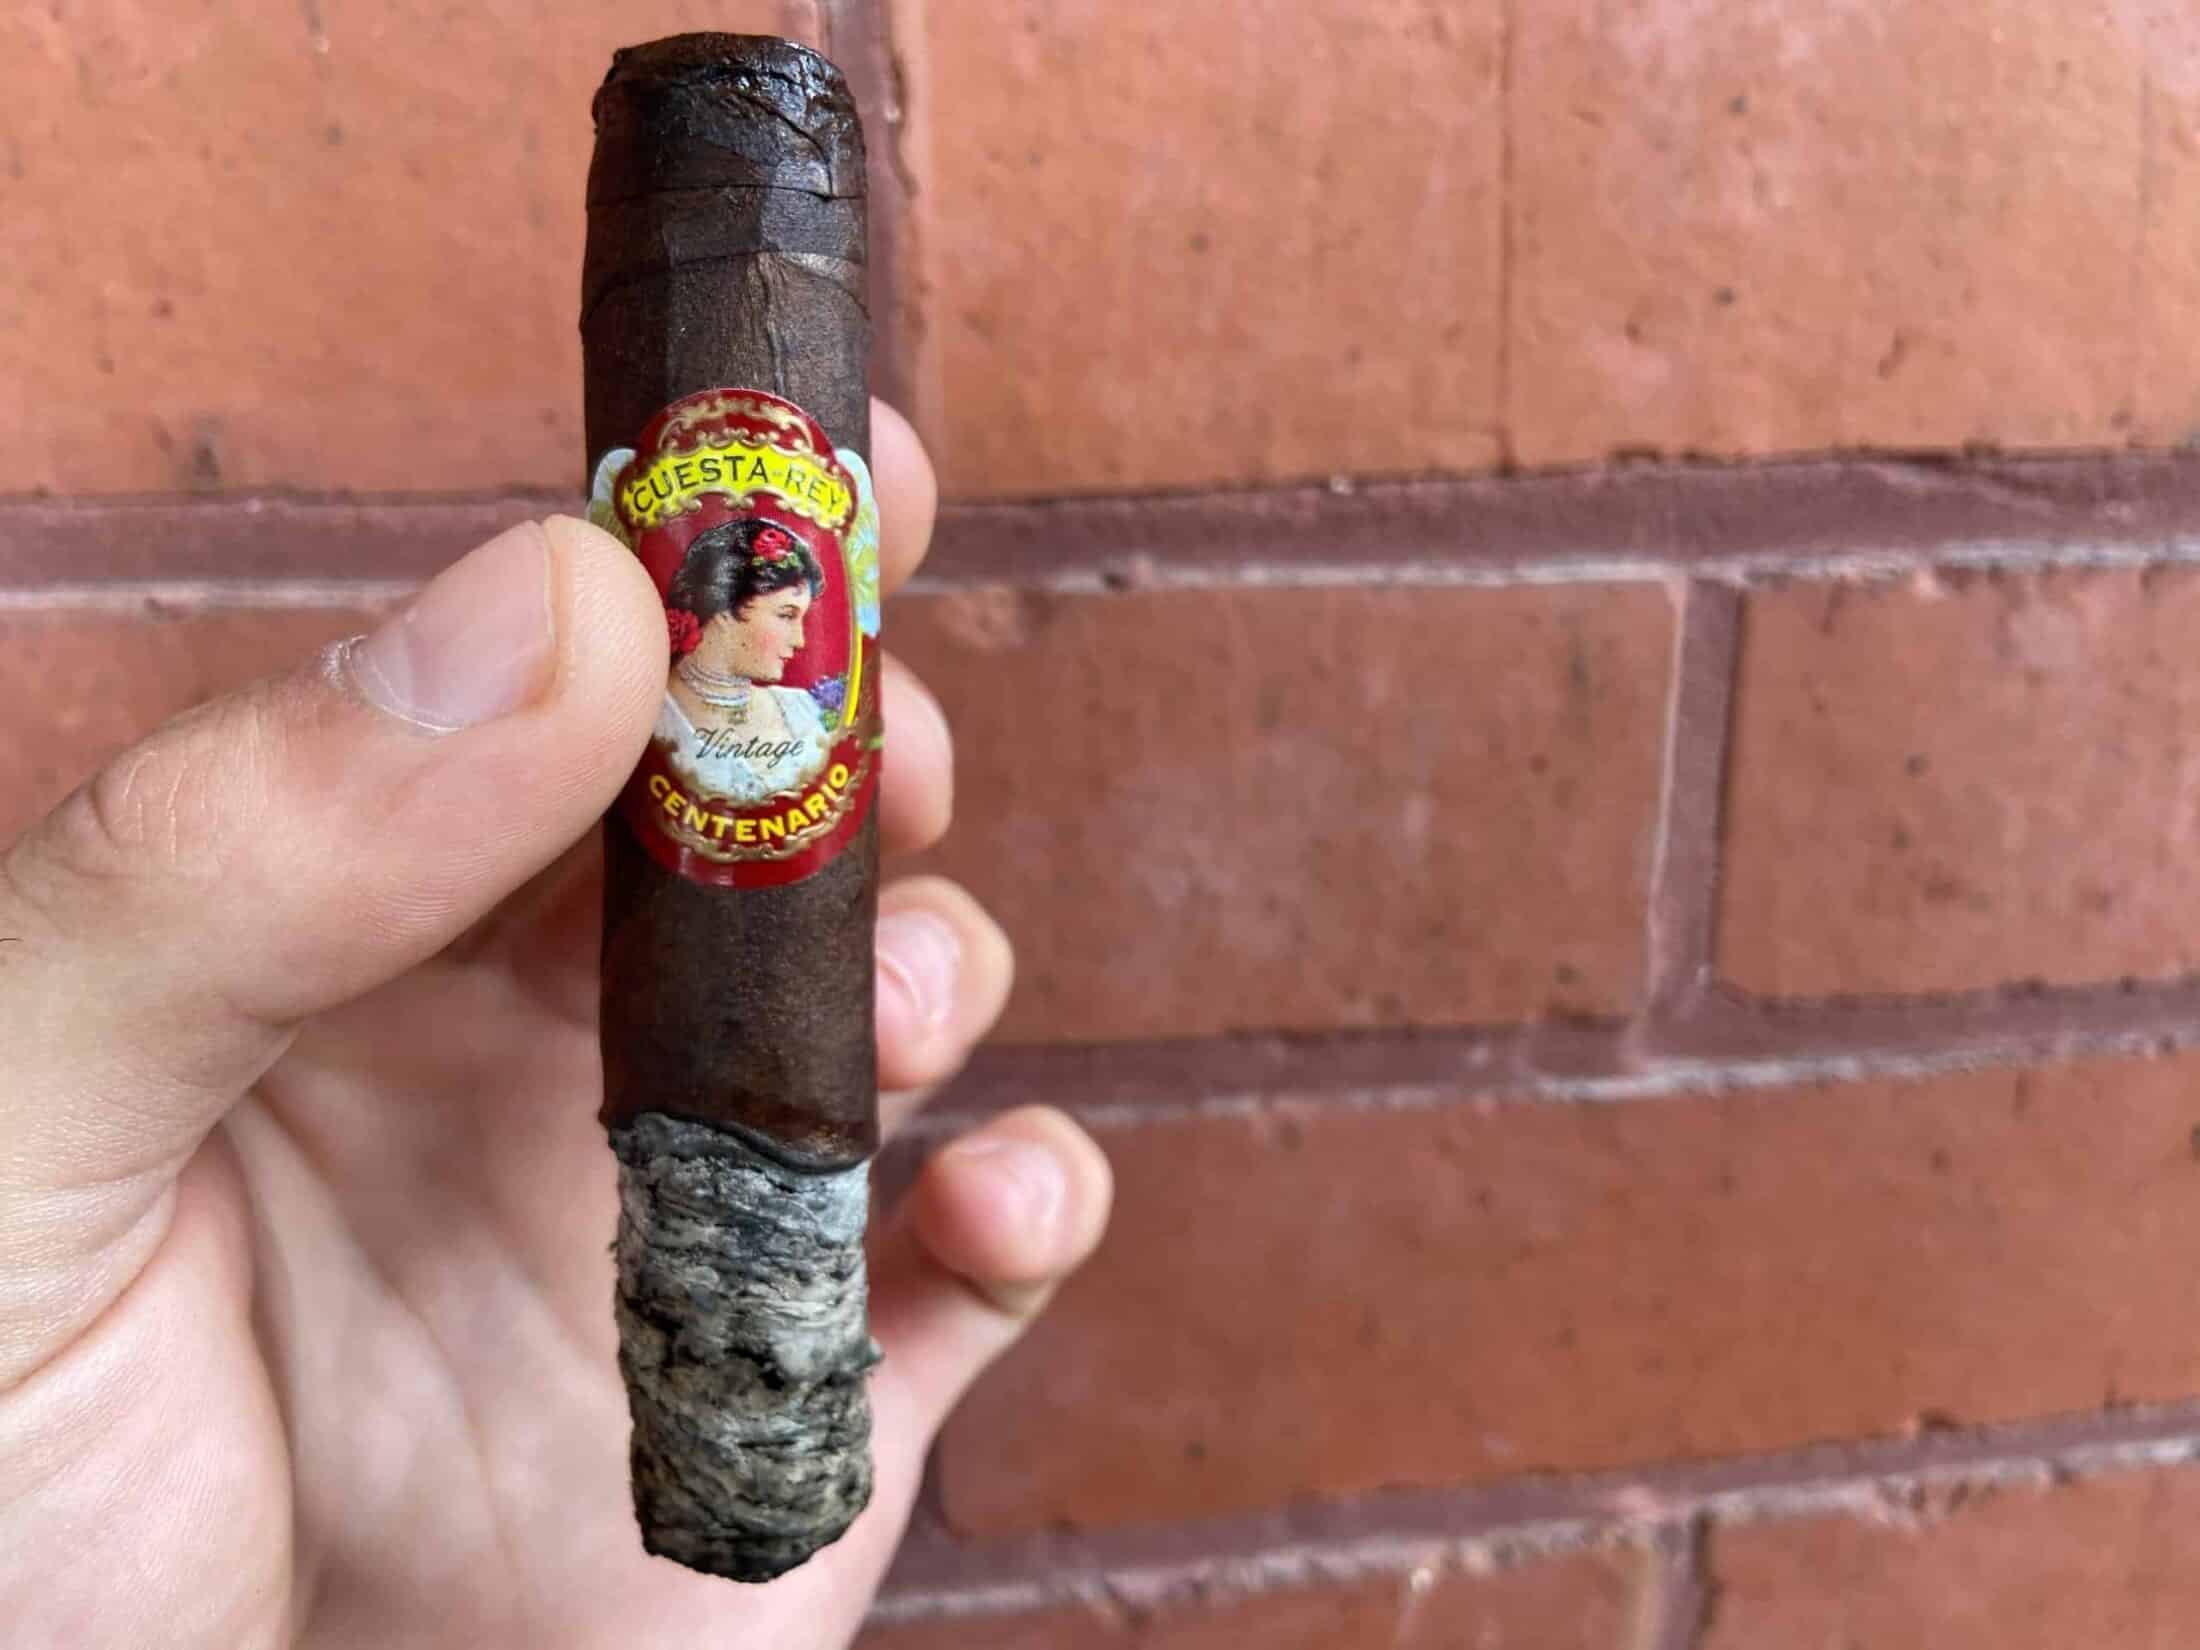 Hand holding Cuesta Rey No. 7 in front of brick wall with ash on the end